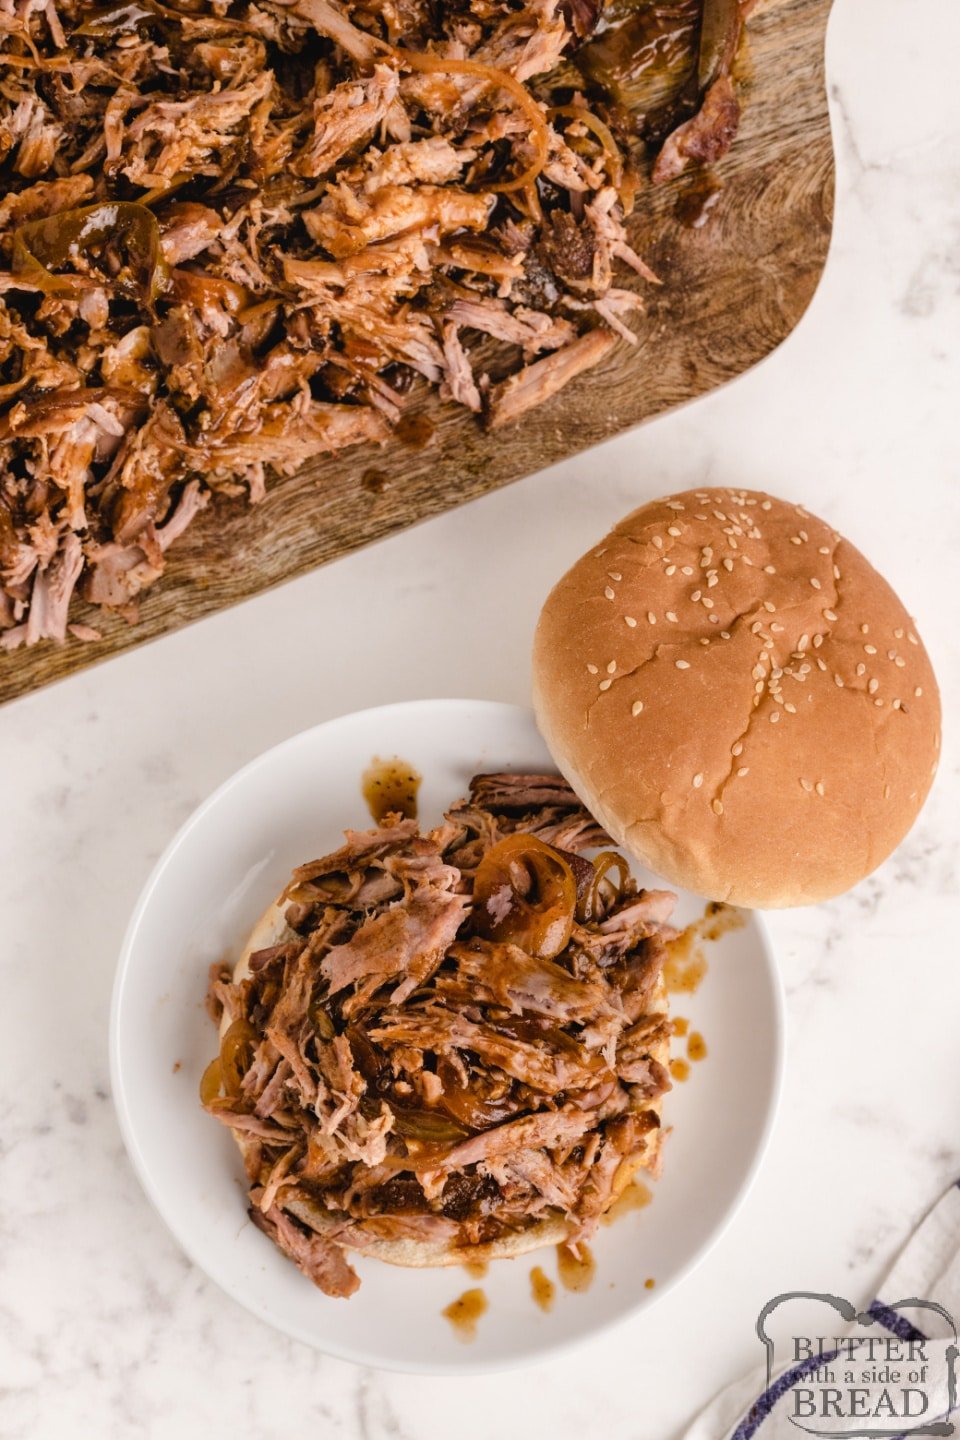 Slow Cooker BBQ Pulled Pork is moist, tender and packed with flavor. This simple crockpot pulled pork recipe is perfect for sandwiches, or even just served over rice.